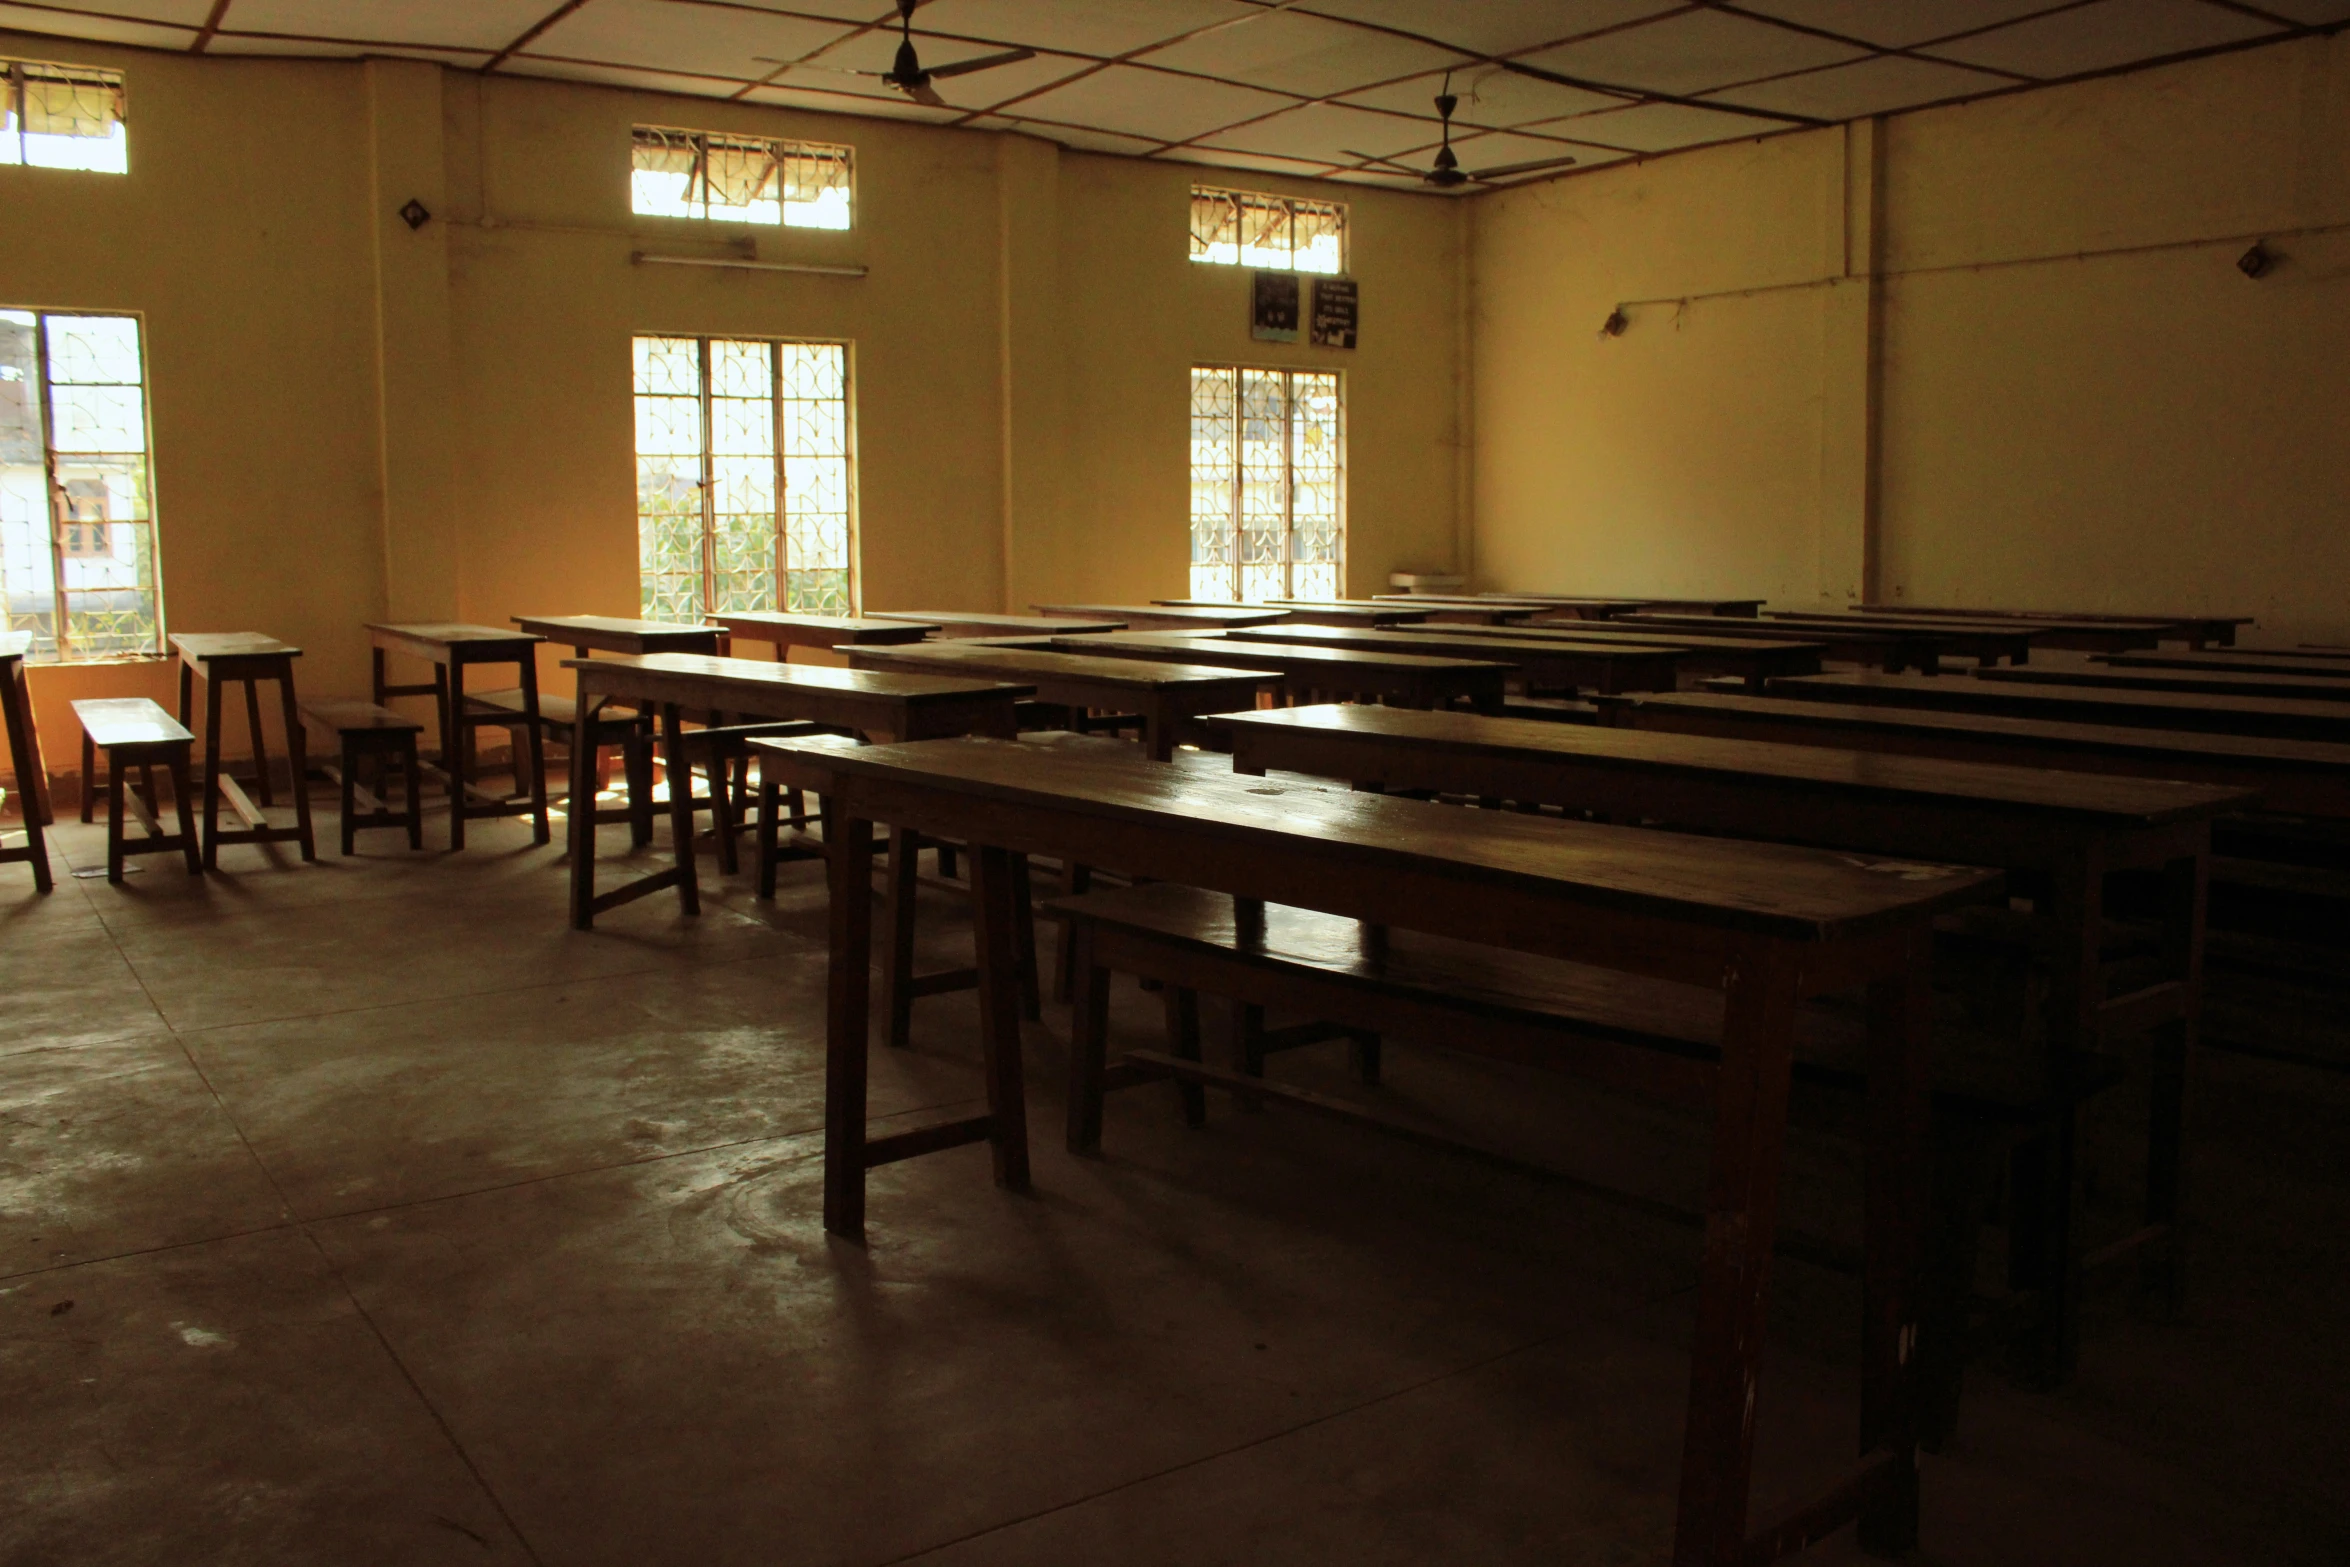 rows of empty desks line the walls and floor in a room that has large windows